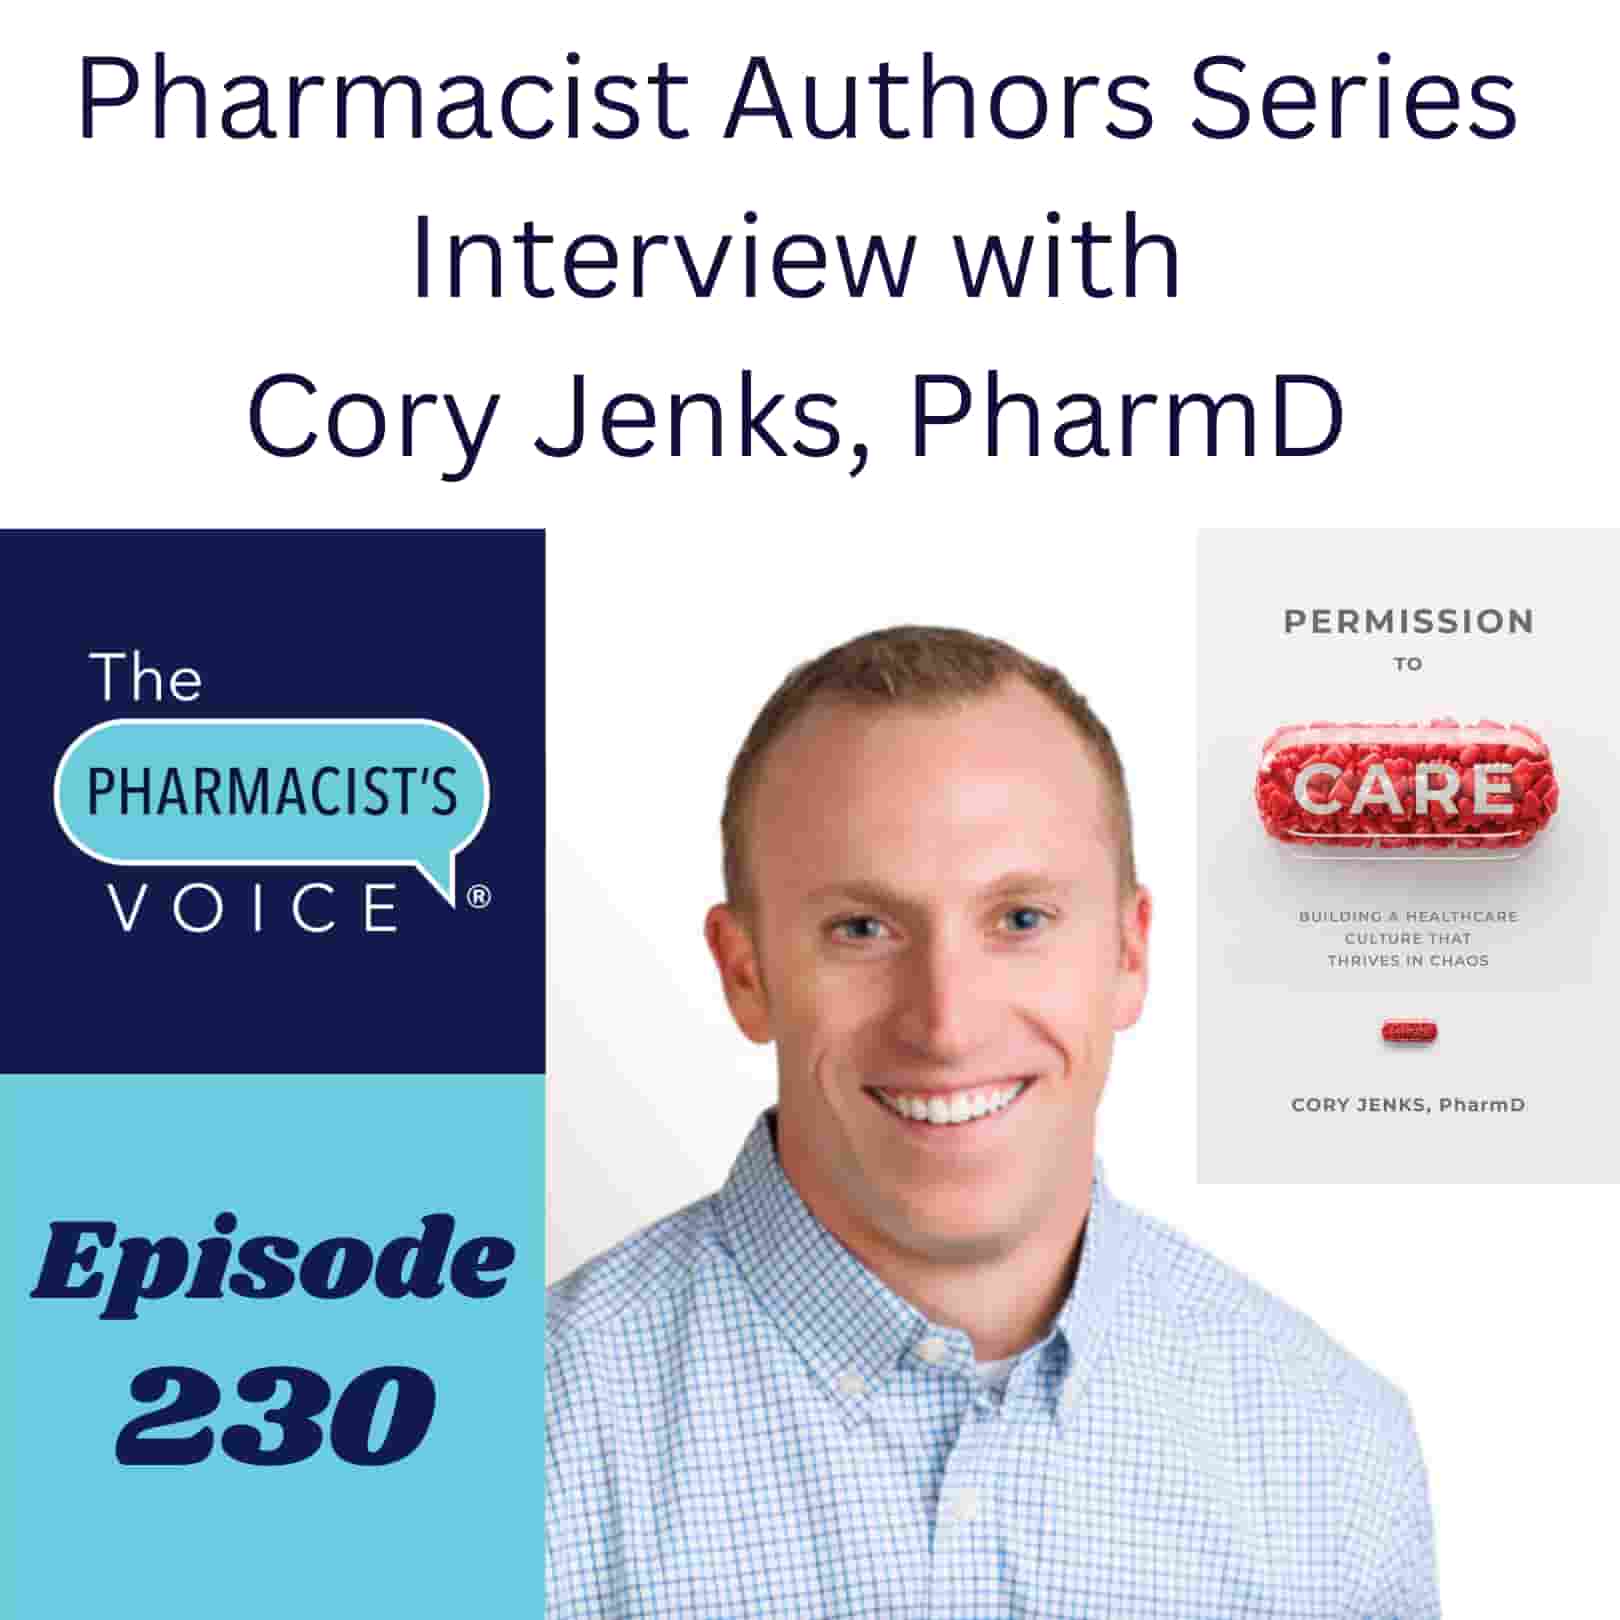 The Pharmacist's Voice Podcast Episode 230. Pharmacist Authors Series Interview with Cory Jenks, PharmD